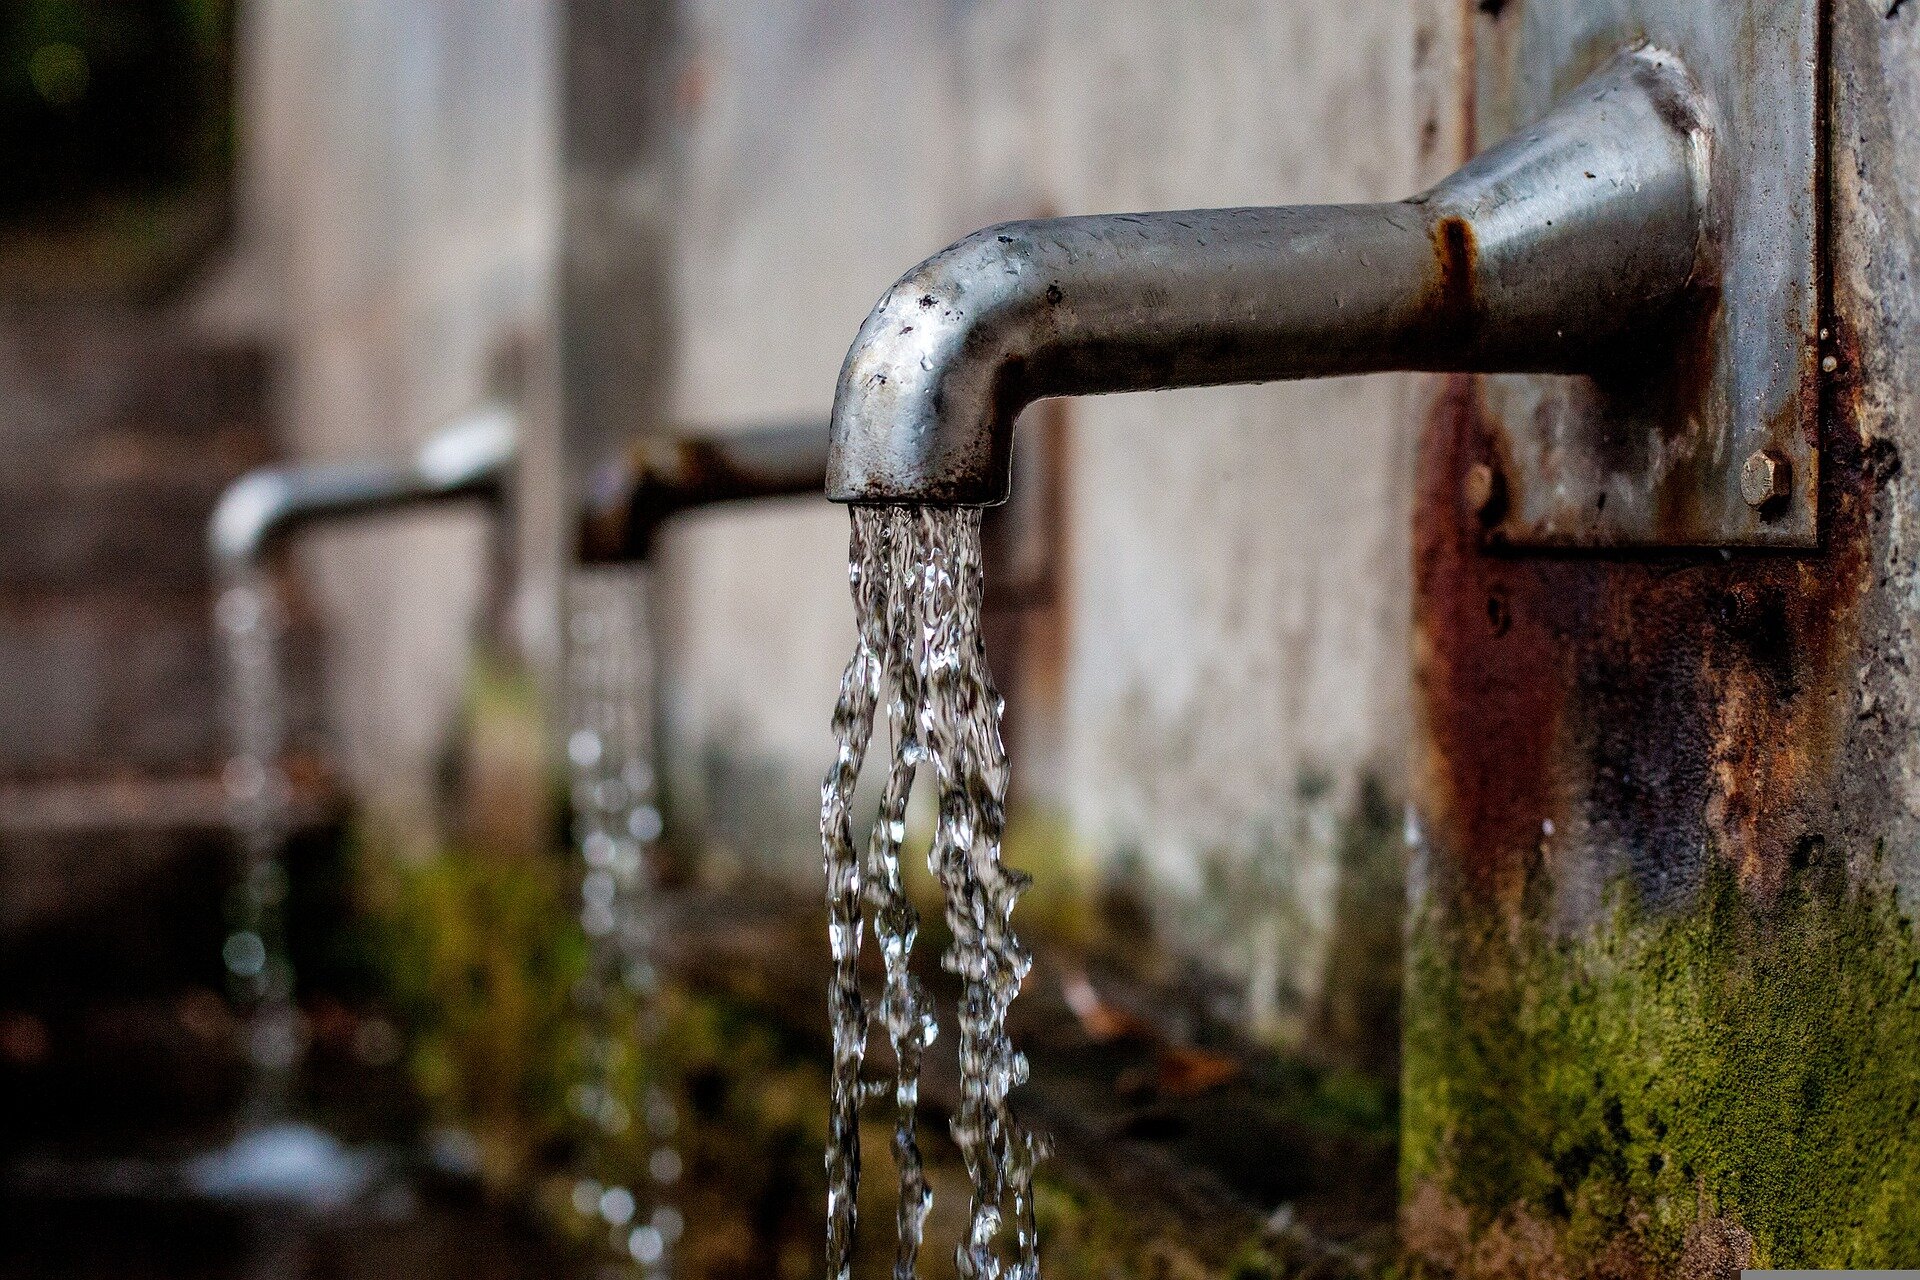 EPA mandates states report on cyber threats to water systems